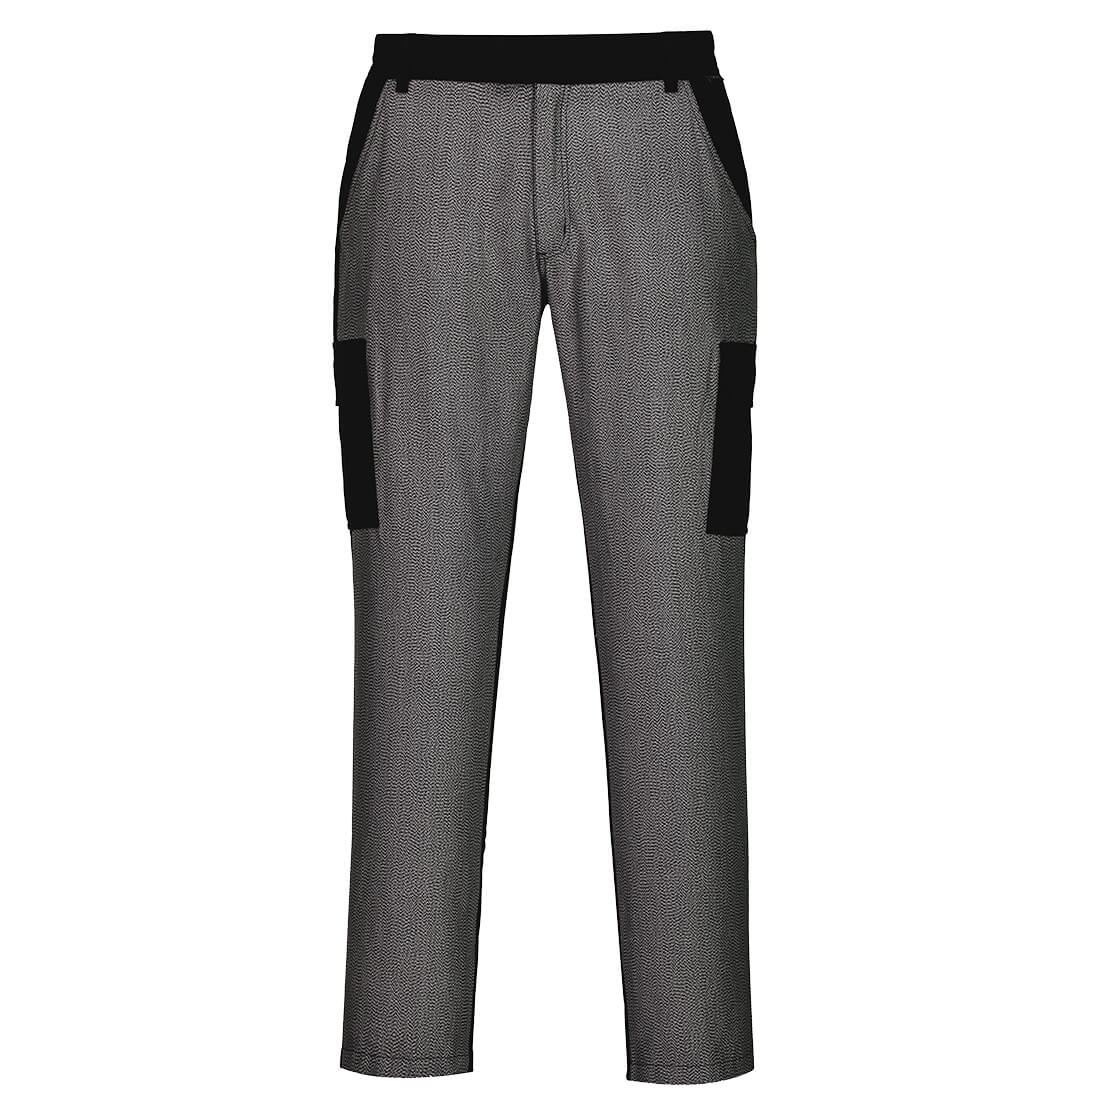 Industry Leading Cut Resistant Trousers For Glass